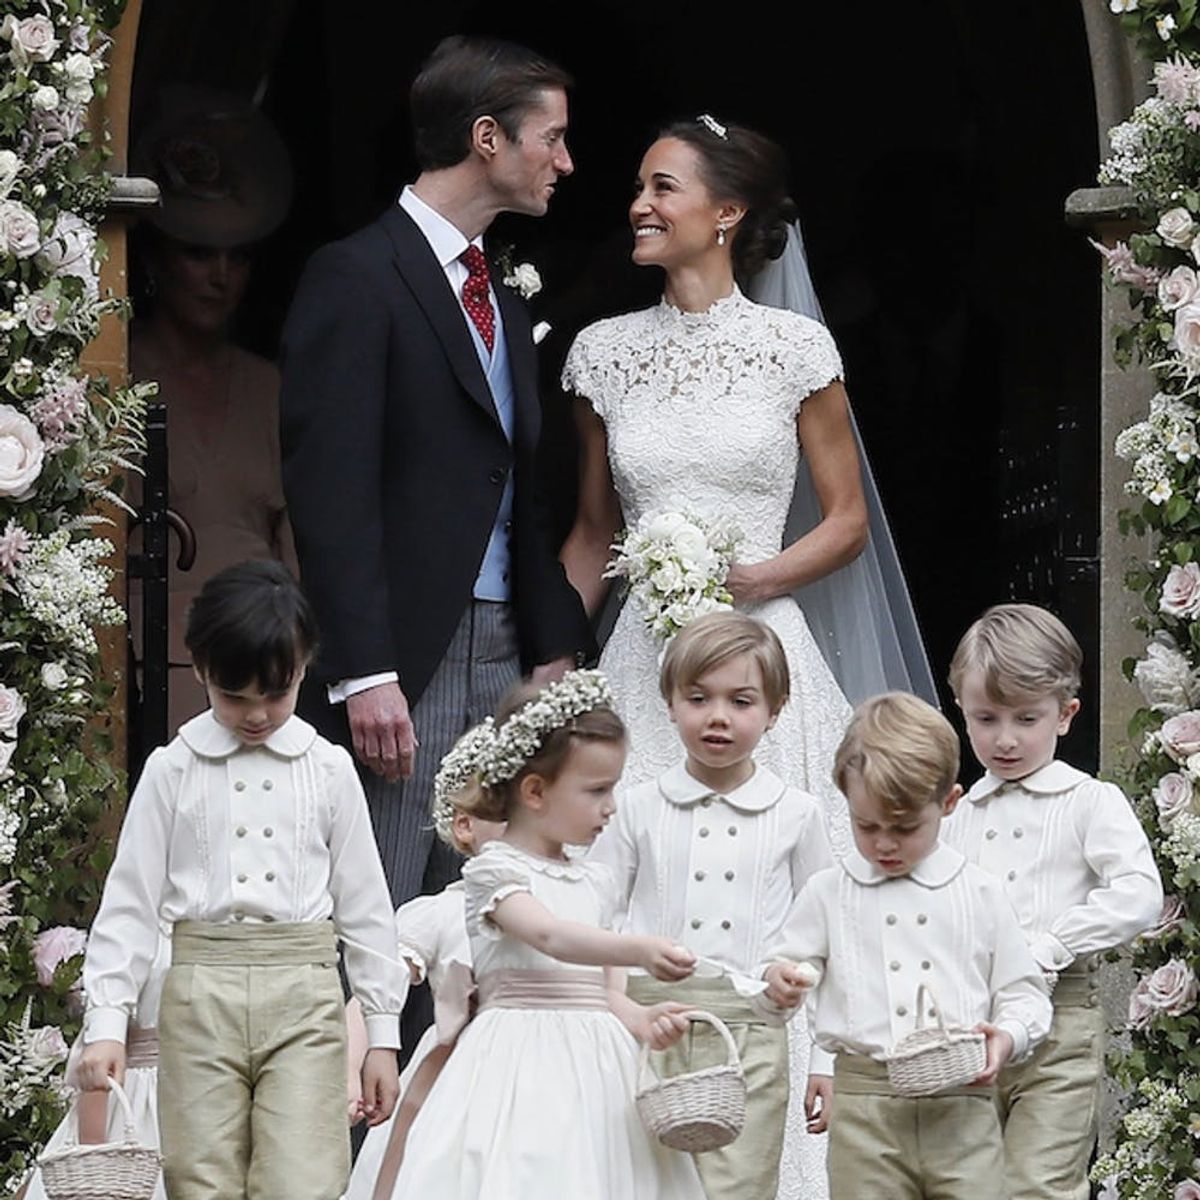 See Pippa Middleton’s Wedding Dress from Every Angle